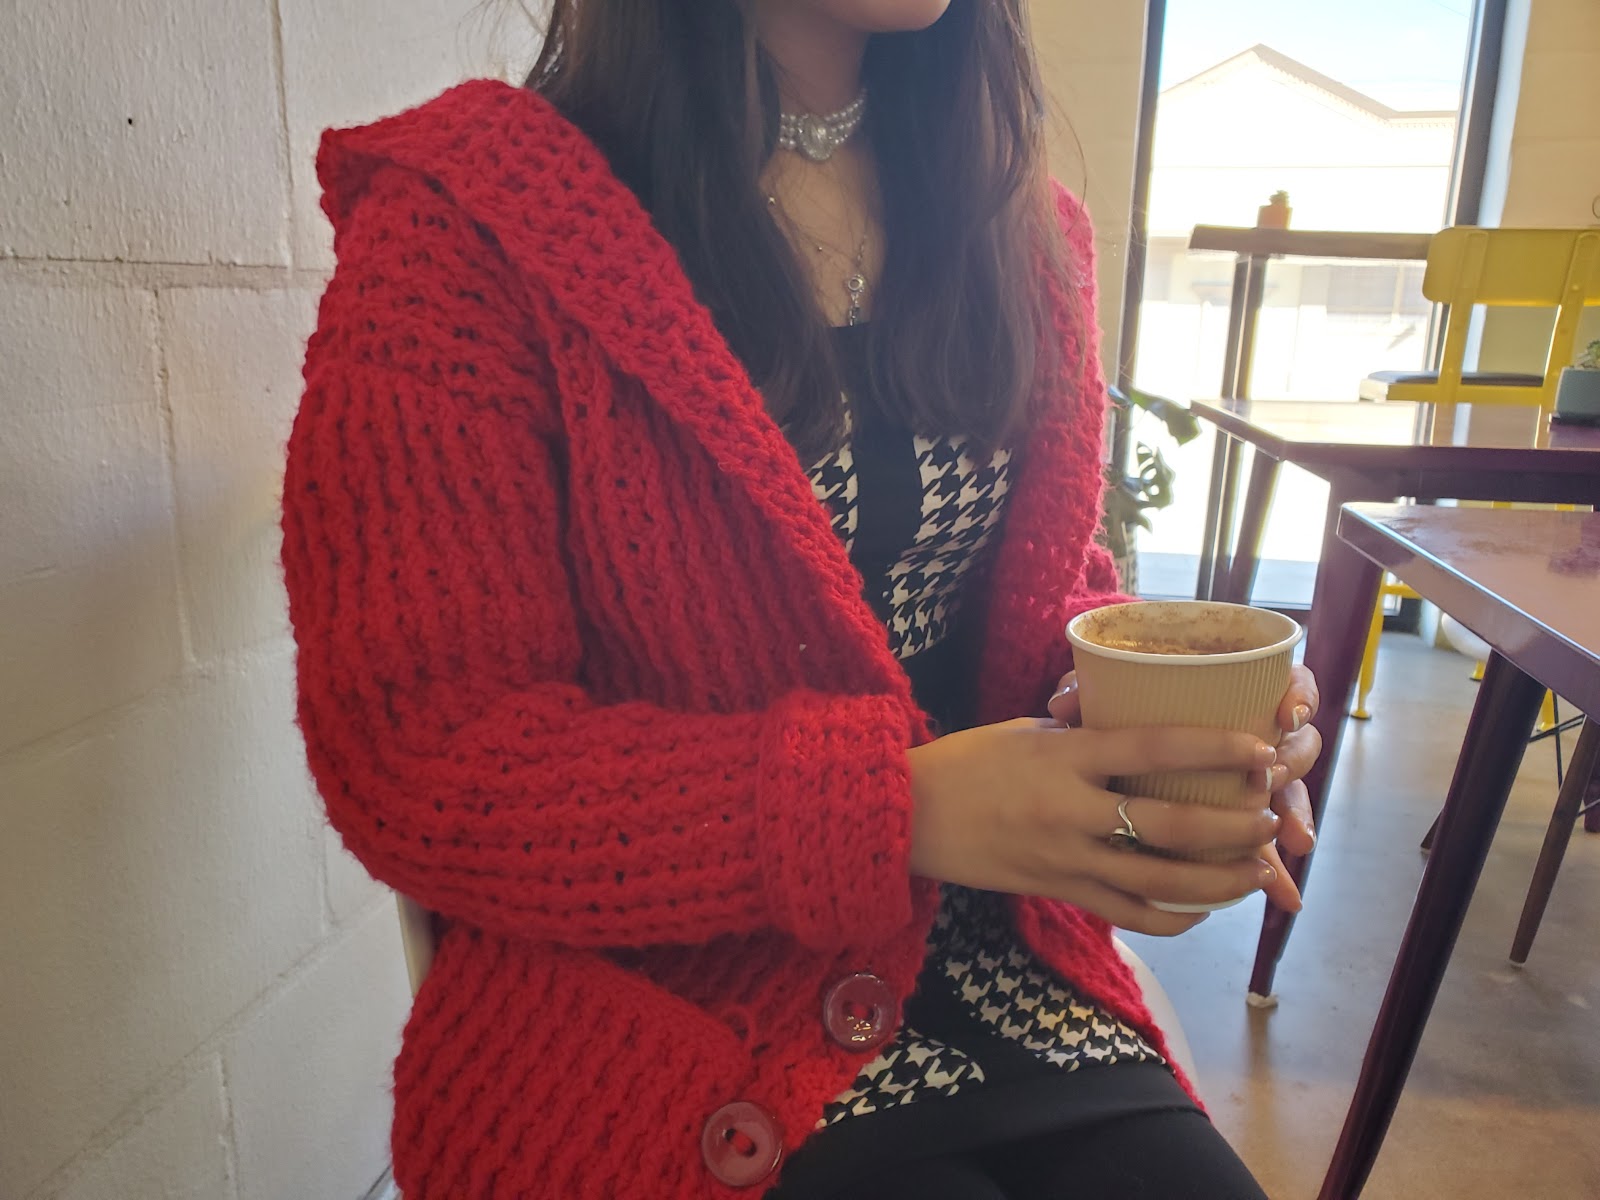 Crocheting a cozy cougar red cardigan for Christmas